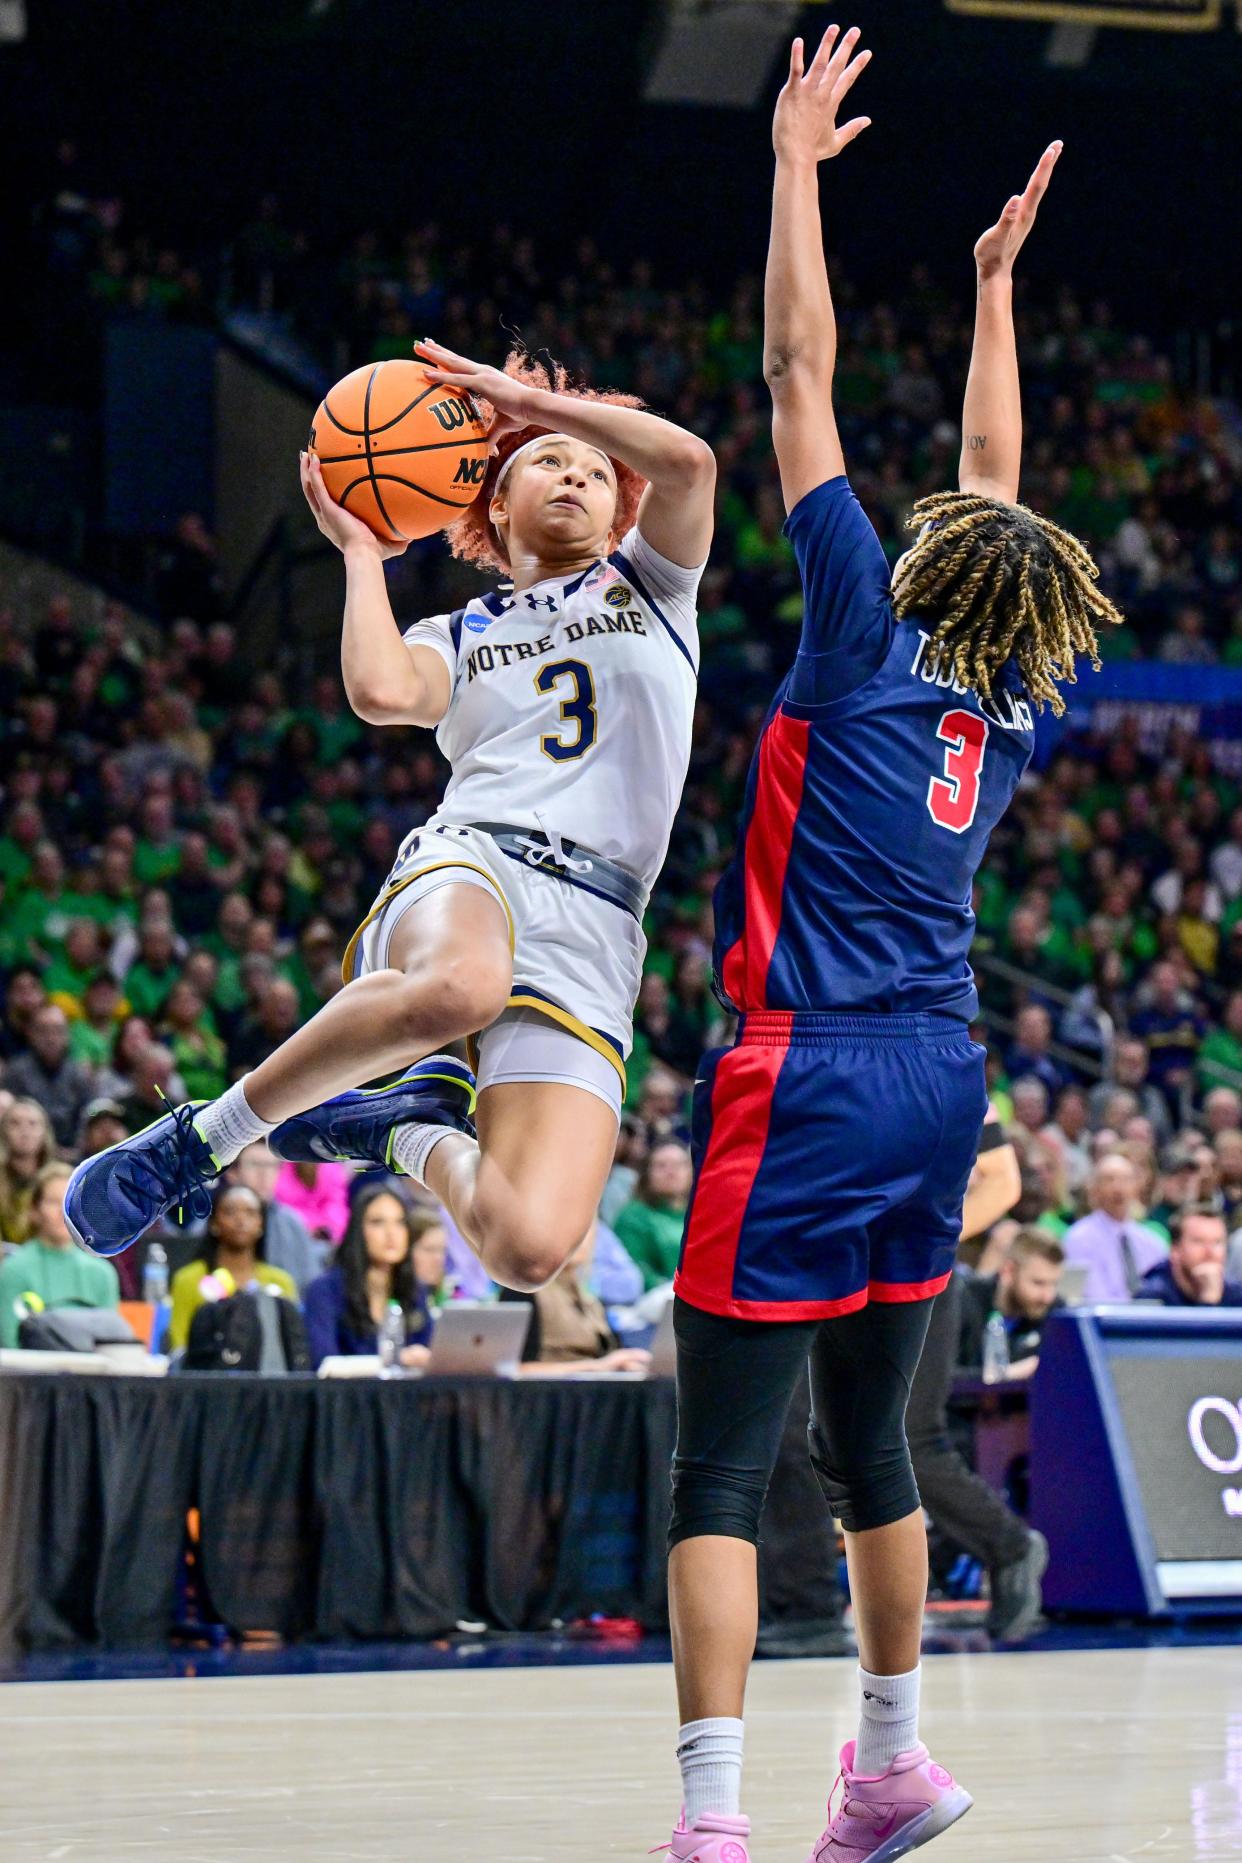 Notre Dame Fighting Irish guard Hannah Hidalgo (3) goes up for a shot as Ole Miss Rebels guard Kennedy Todd-Williams (3) defends in the second half of the NCAA Tournament second round game at the Purcell Pavilion March 25 in South Bend, Indiana.